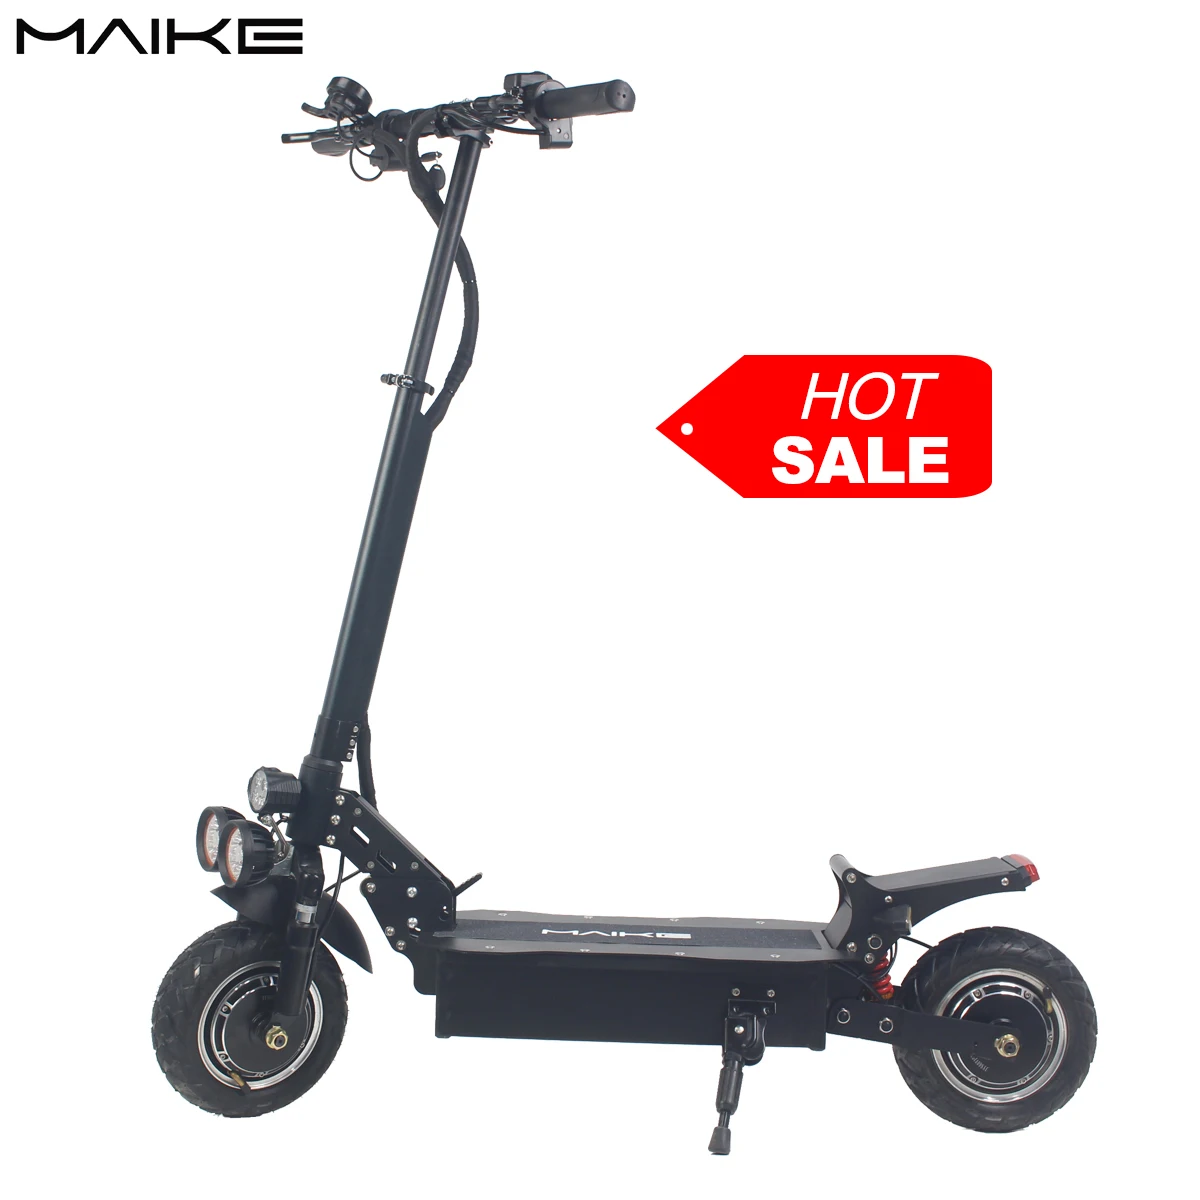 

Factory cheap Maike mk6 10 inch 1000w 2000w motor scooter folding off road scooter dual motor electric scooters high speed